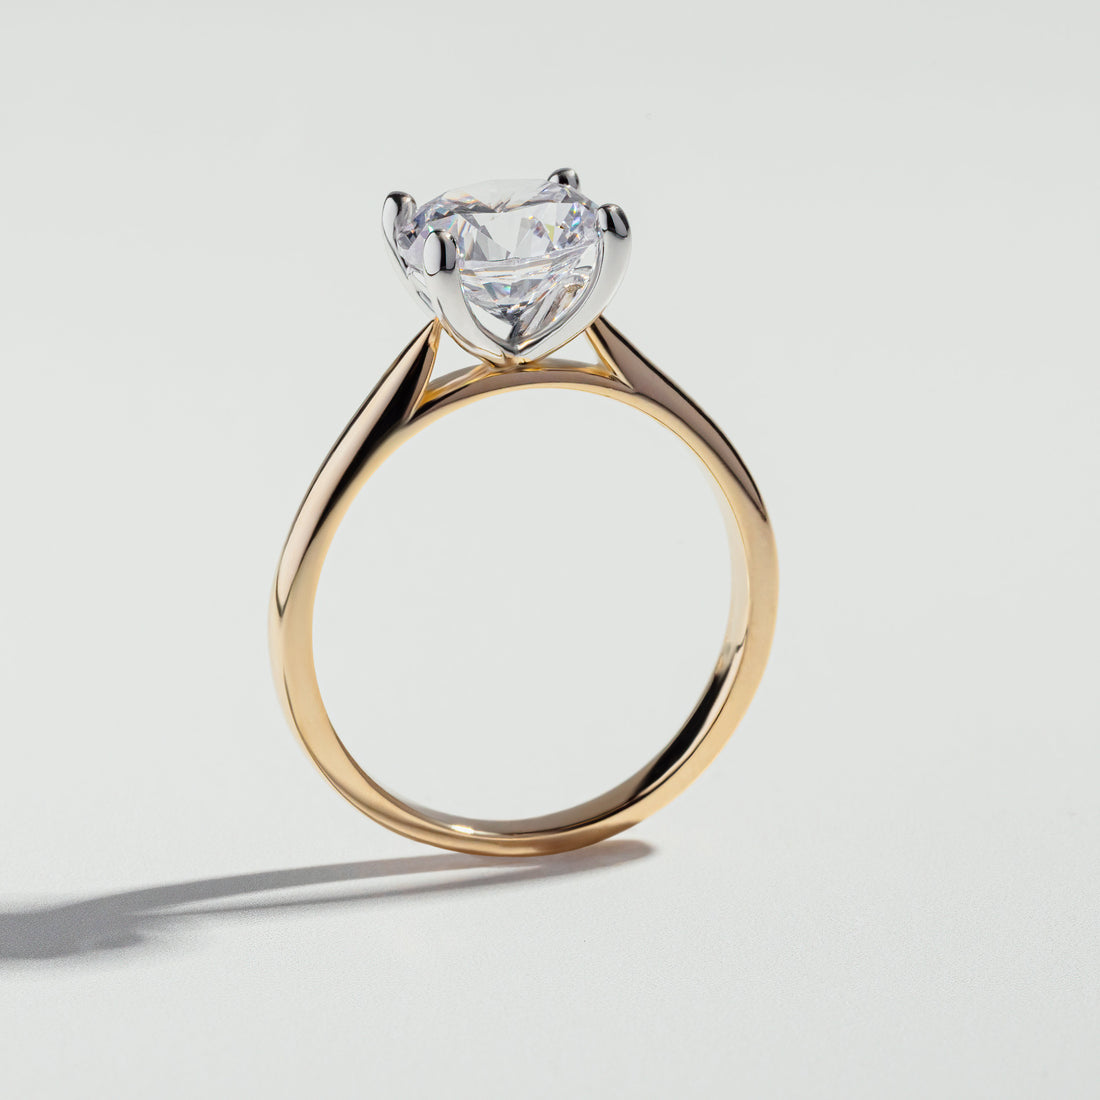 The Round Cut Two-Tone Diamond Solitaire Ring